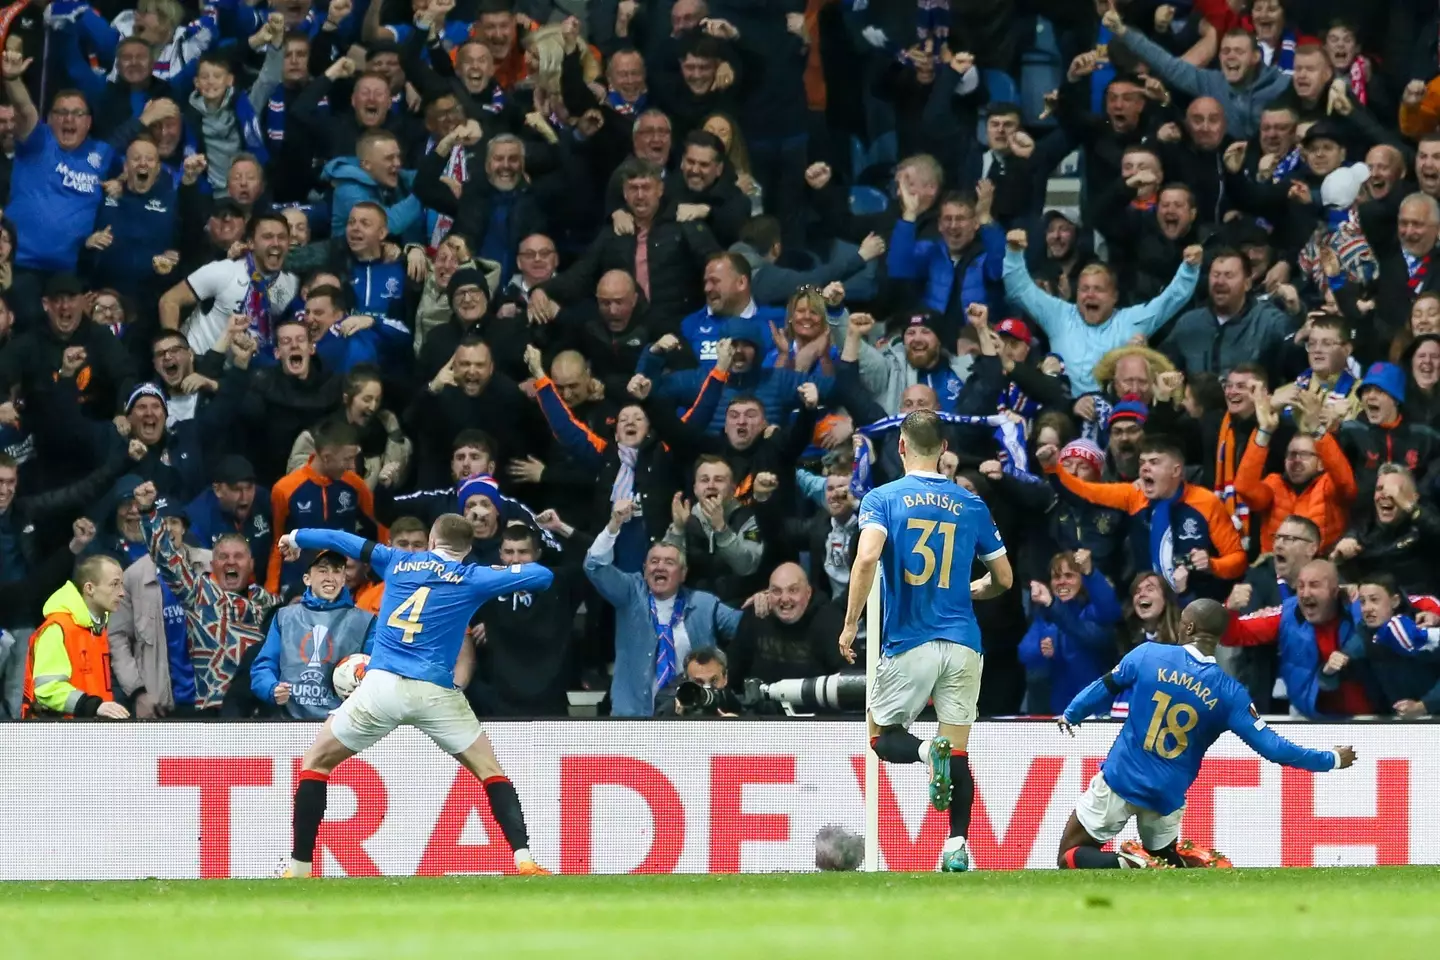 Rangers have made the final for the first time in 13 years.